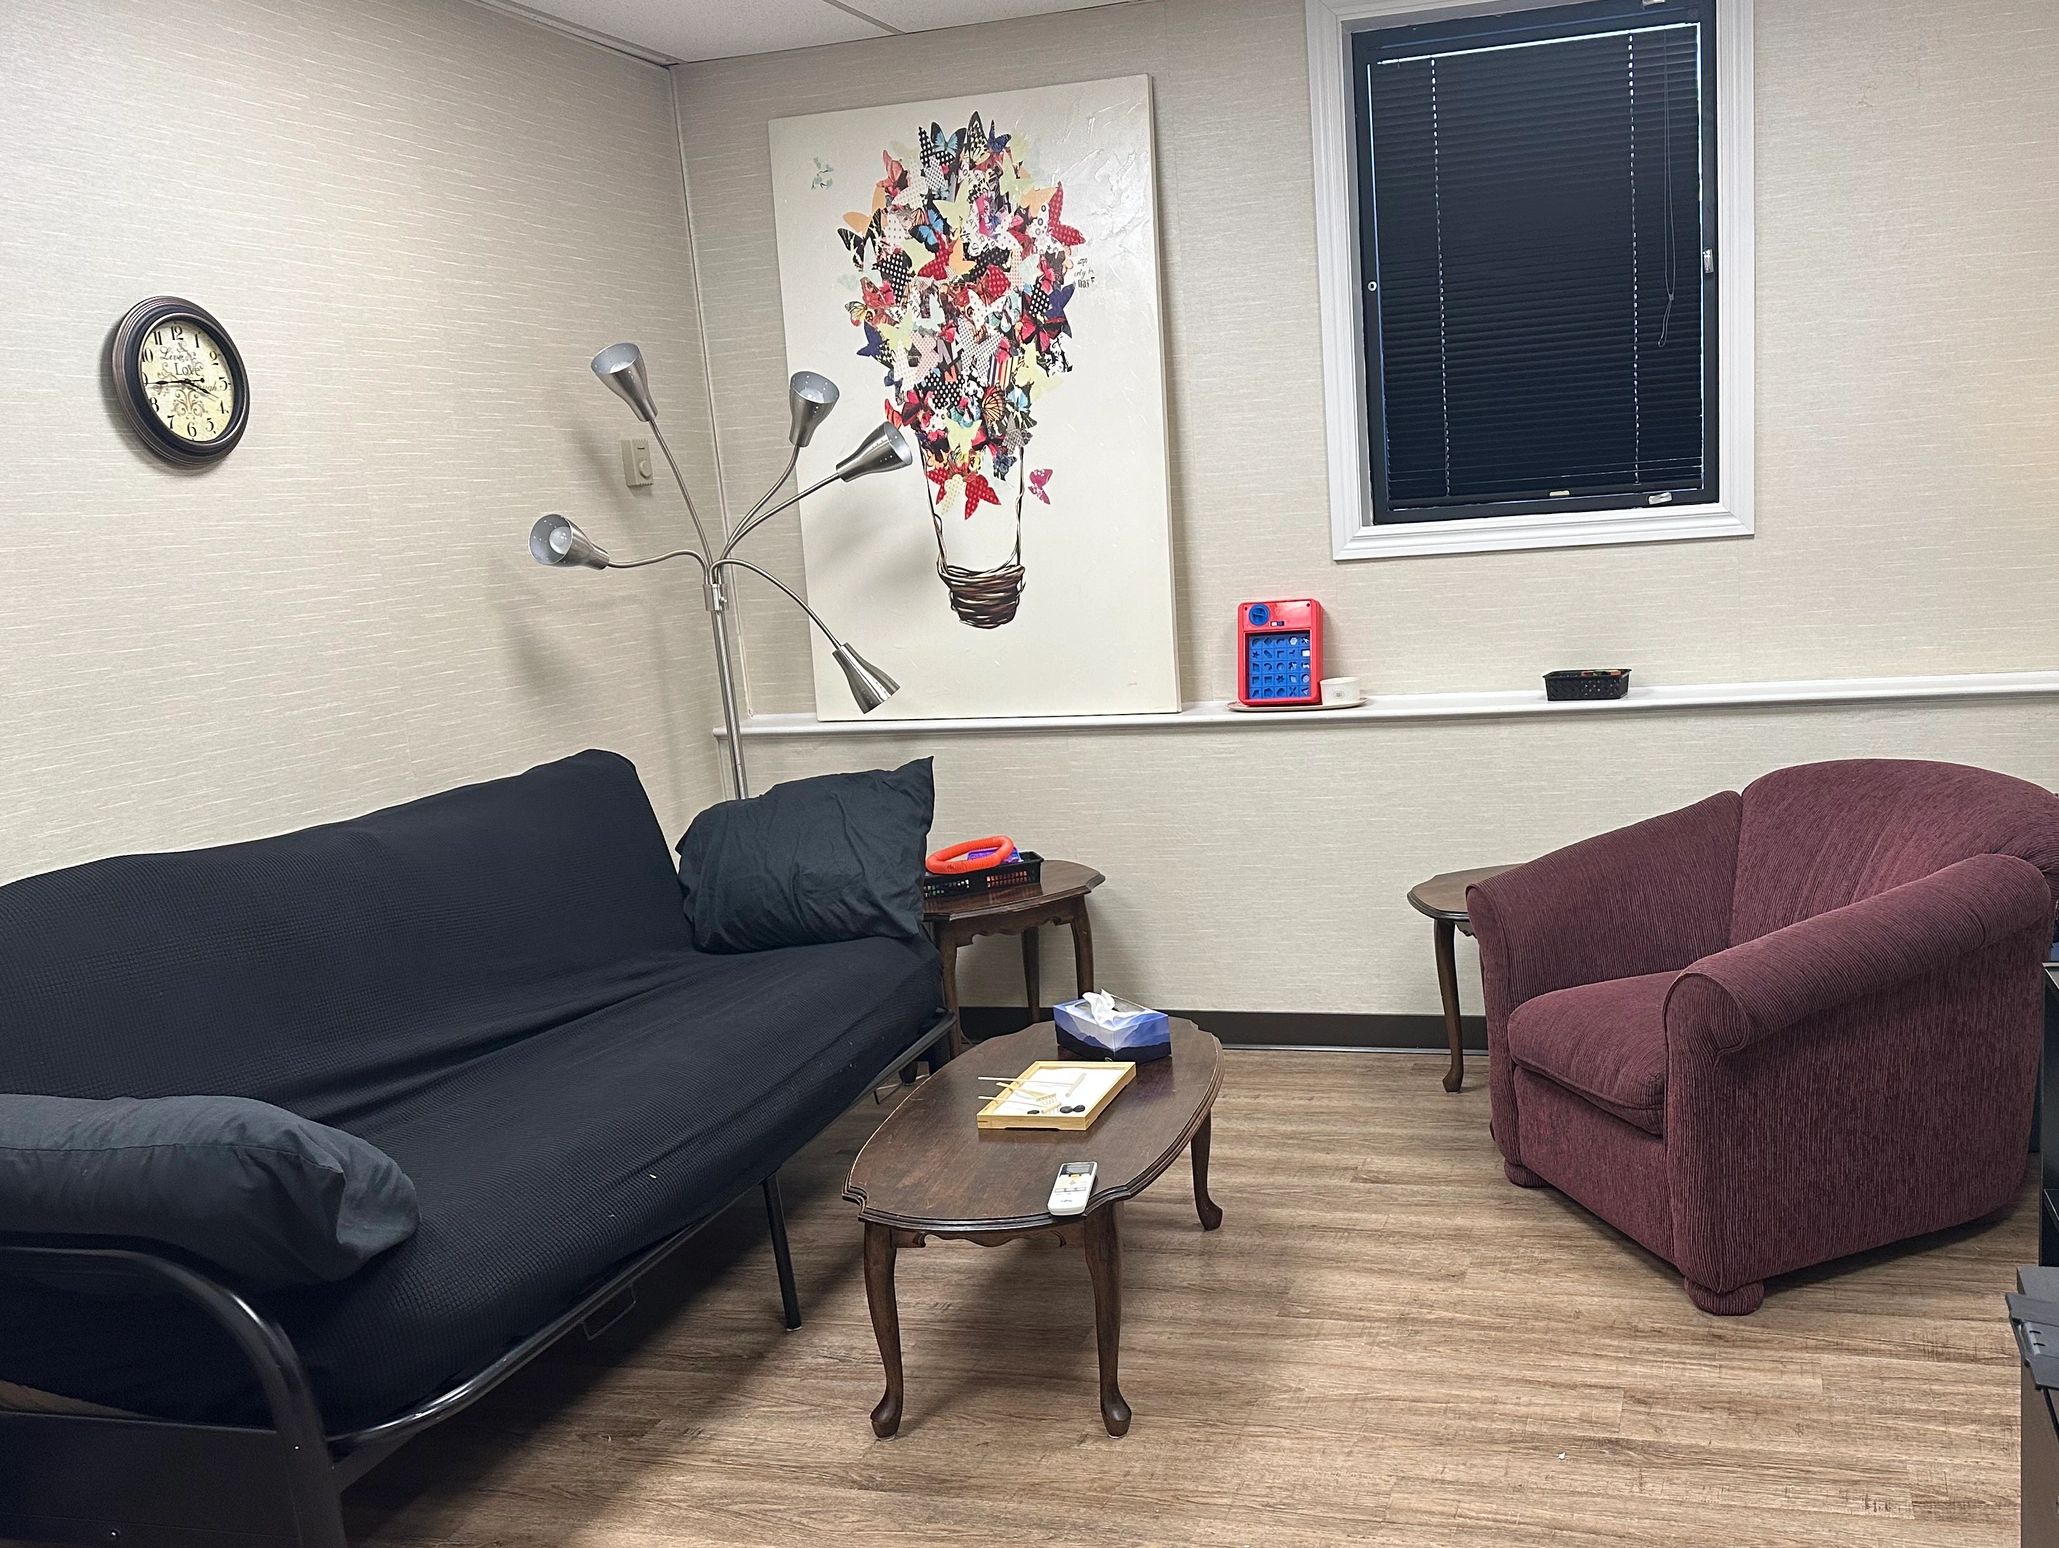 The therapy room, with a couch on the left and chair on the right.